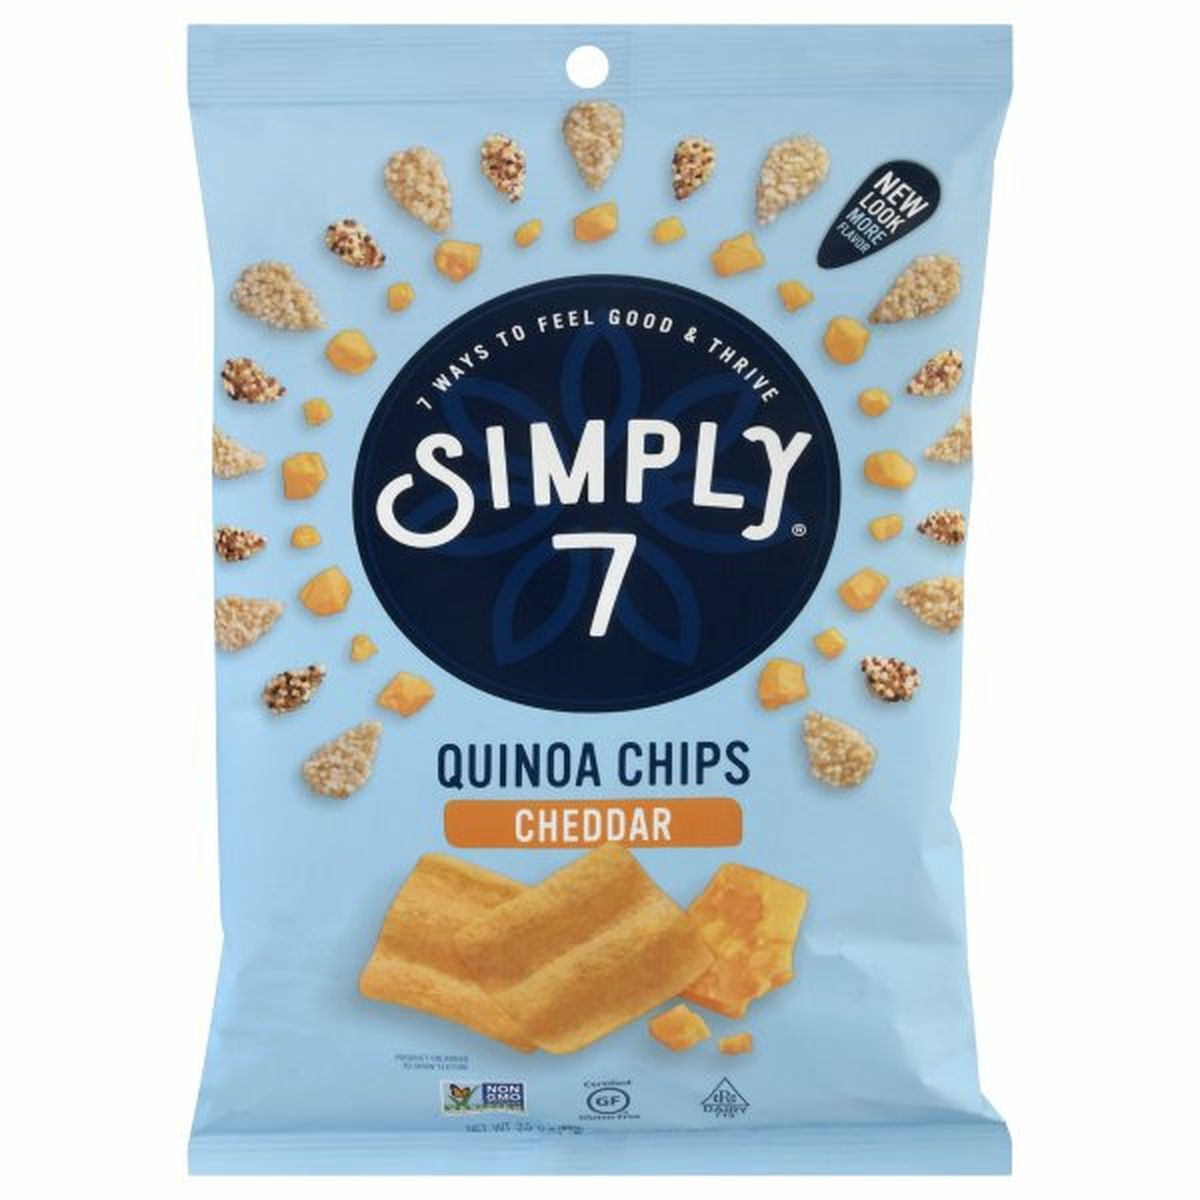 Calories in Simply7 Quinoa Chips, Cheddar